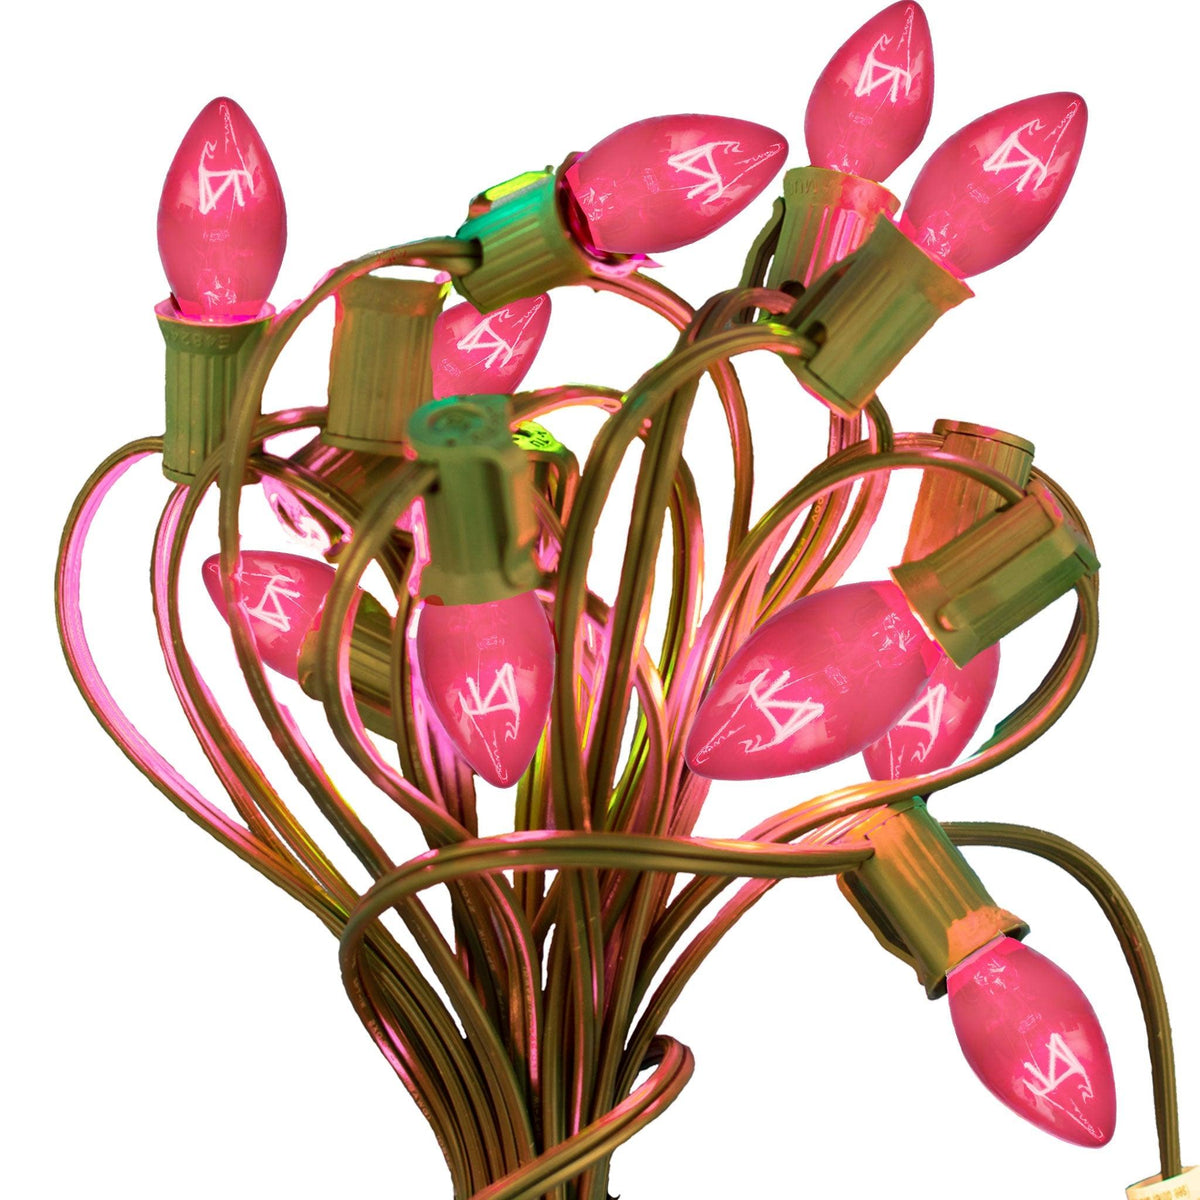 Shop for 25FT Long C7/C9 Candelabra Style Pink Colored Outdoor String Lighting Sets with Cords Included at leedisplay.com